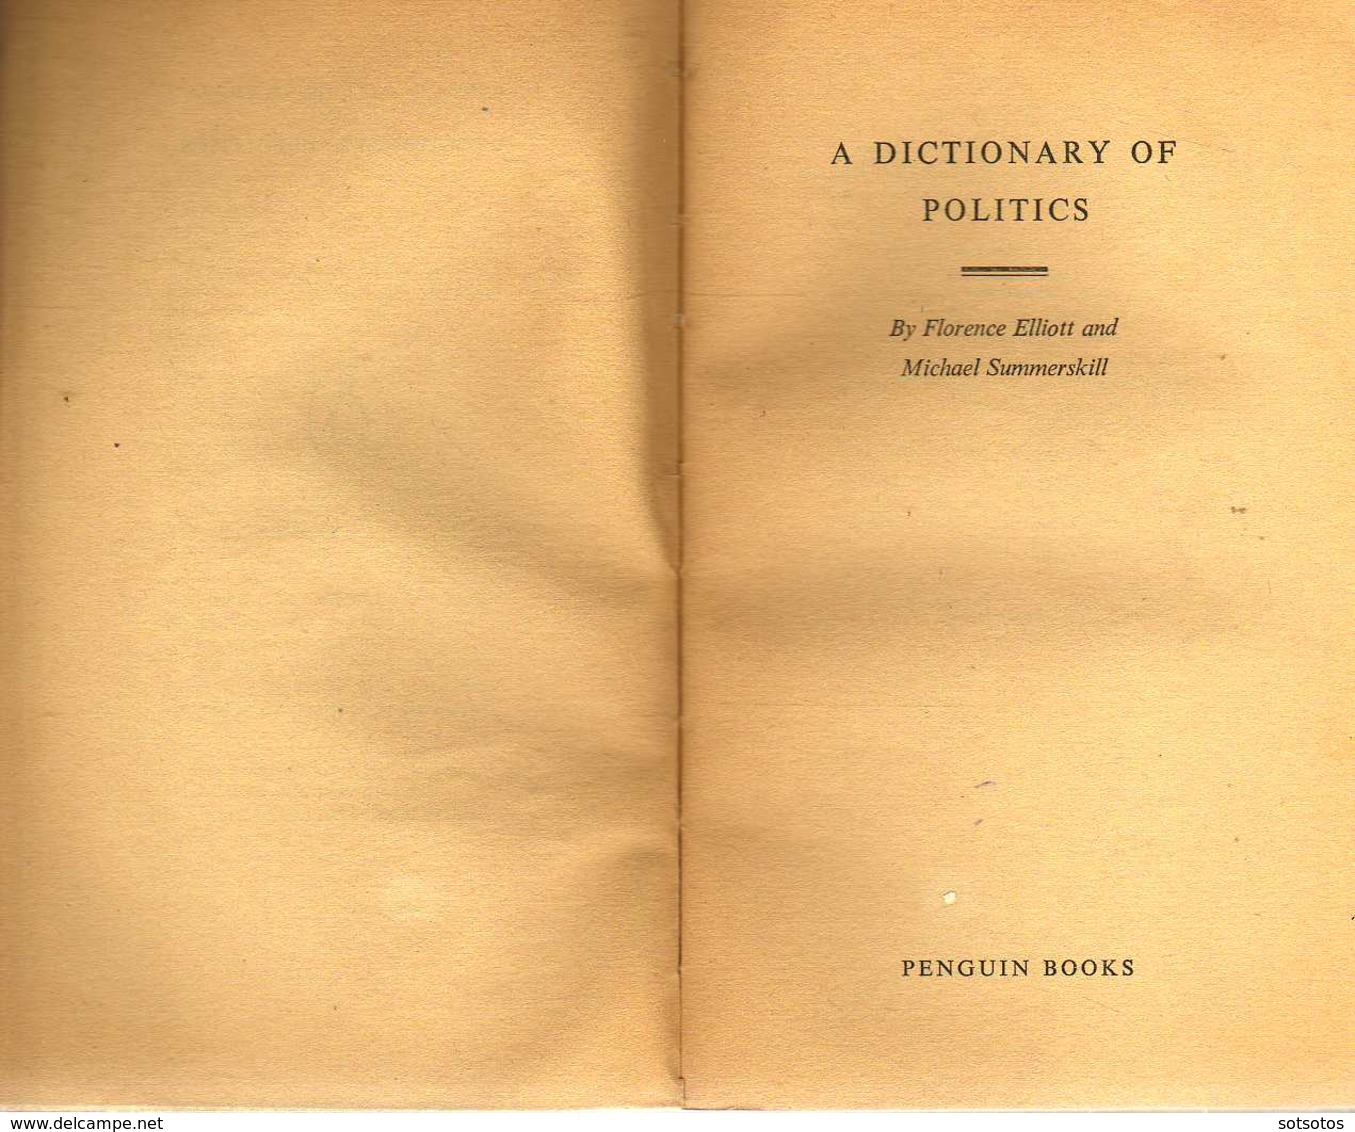 A DICTIONNARY  Of POLITICS:  Florence ELLIOTT And Michael SUMMERSKILL  - Ed. PENGUIN BOOKS, G.B. (1959), 352 Pages (11X1 - Dizionari, Thesaurus